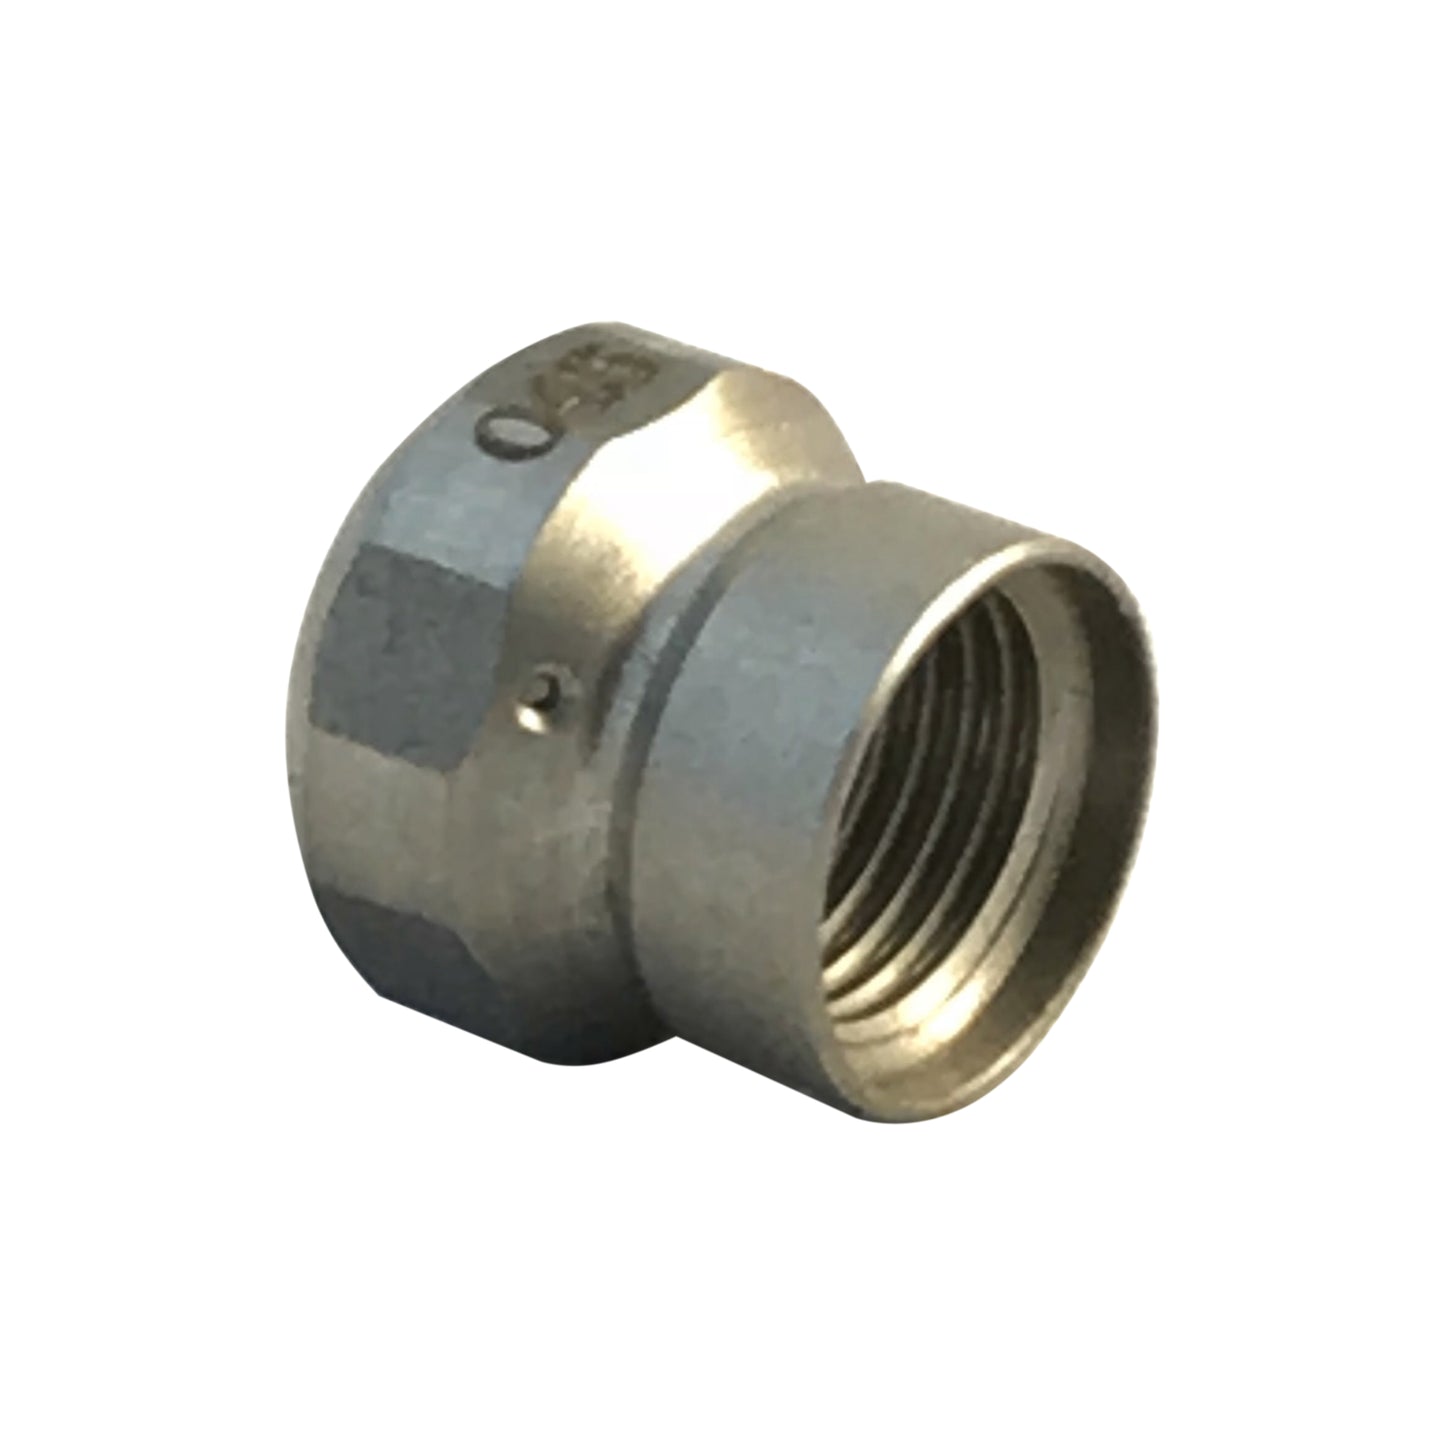 Drain and Sewer cleaning Jetting Nozzle for up to 3000psi pressure washers 1/8" NPT thread - 045 Jet Size